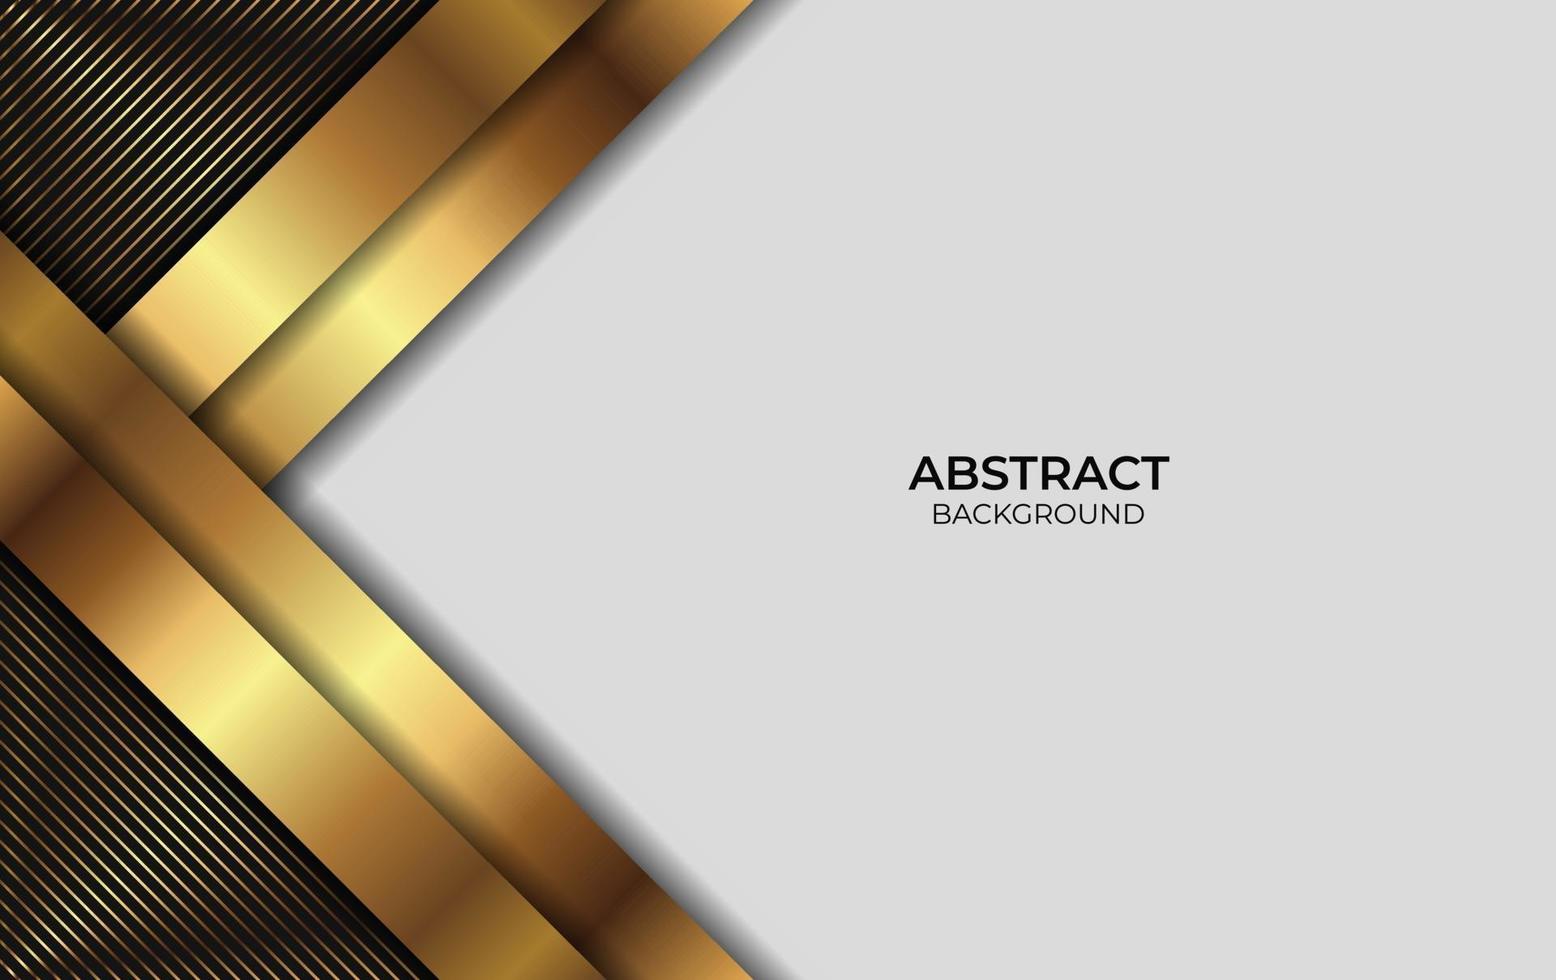 Background Abstract Gold And Black Design vector